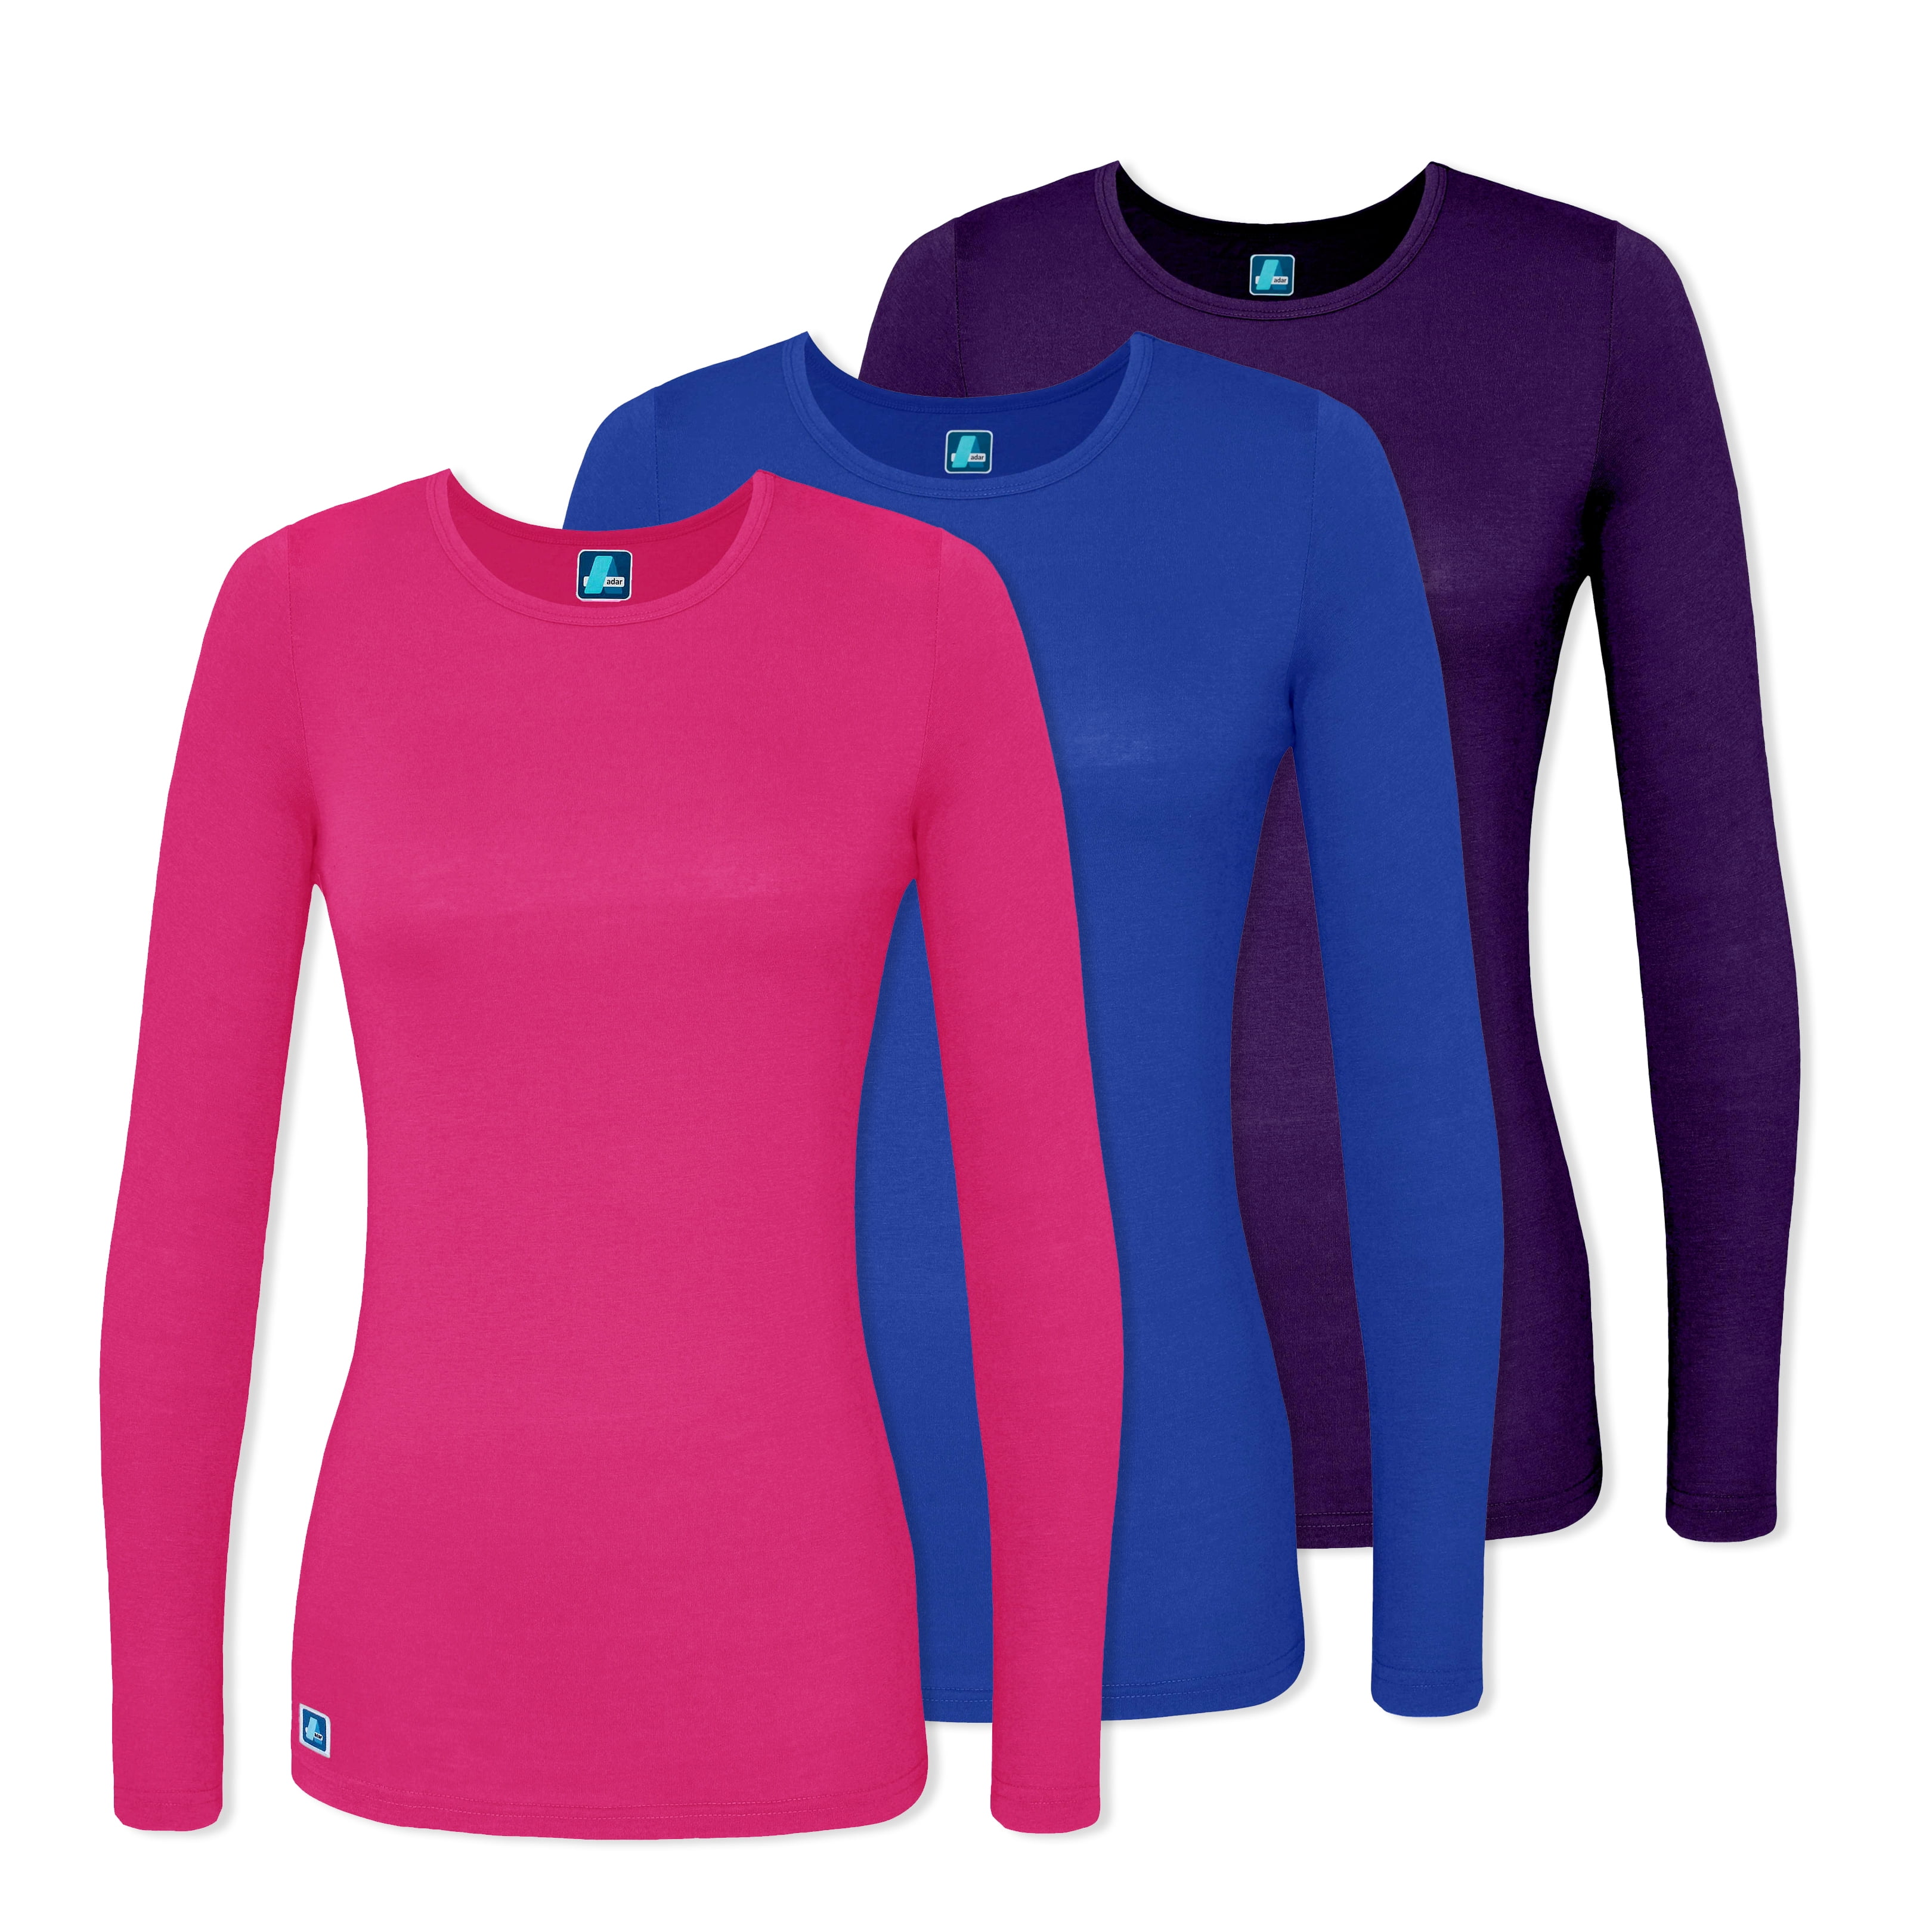 Looking For The Perfect Base Layer To Wear Under Scrubs? Check